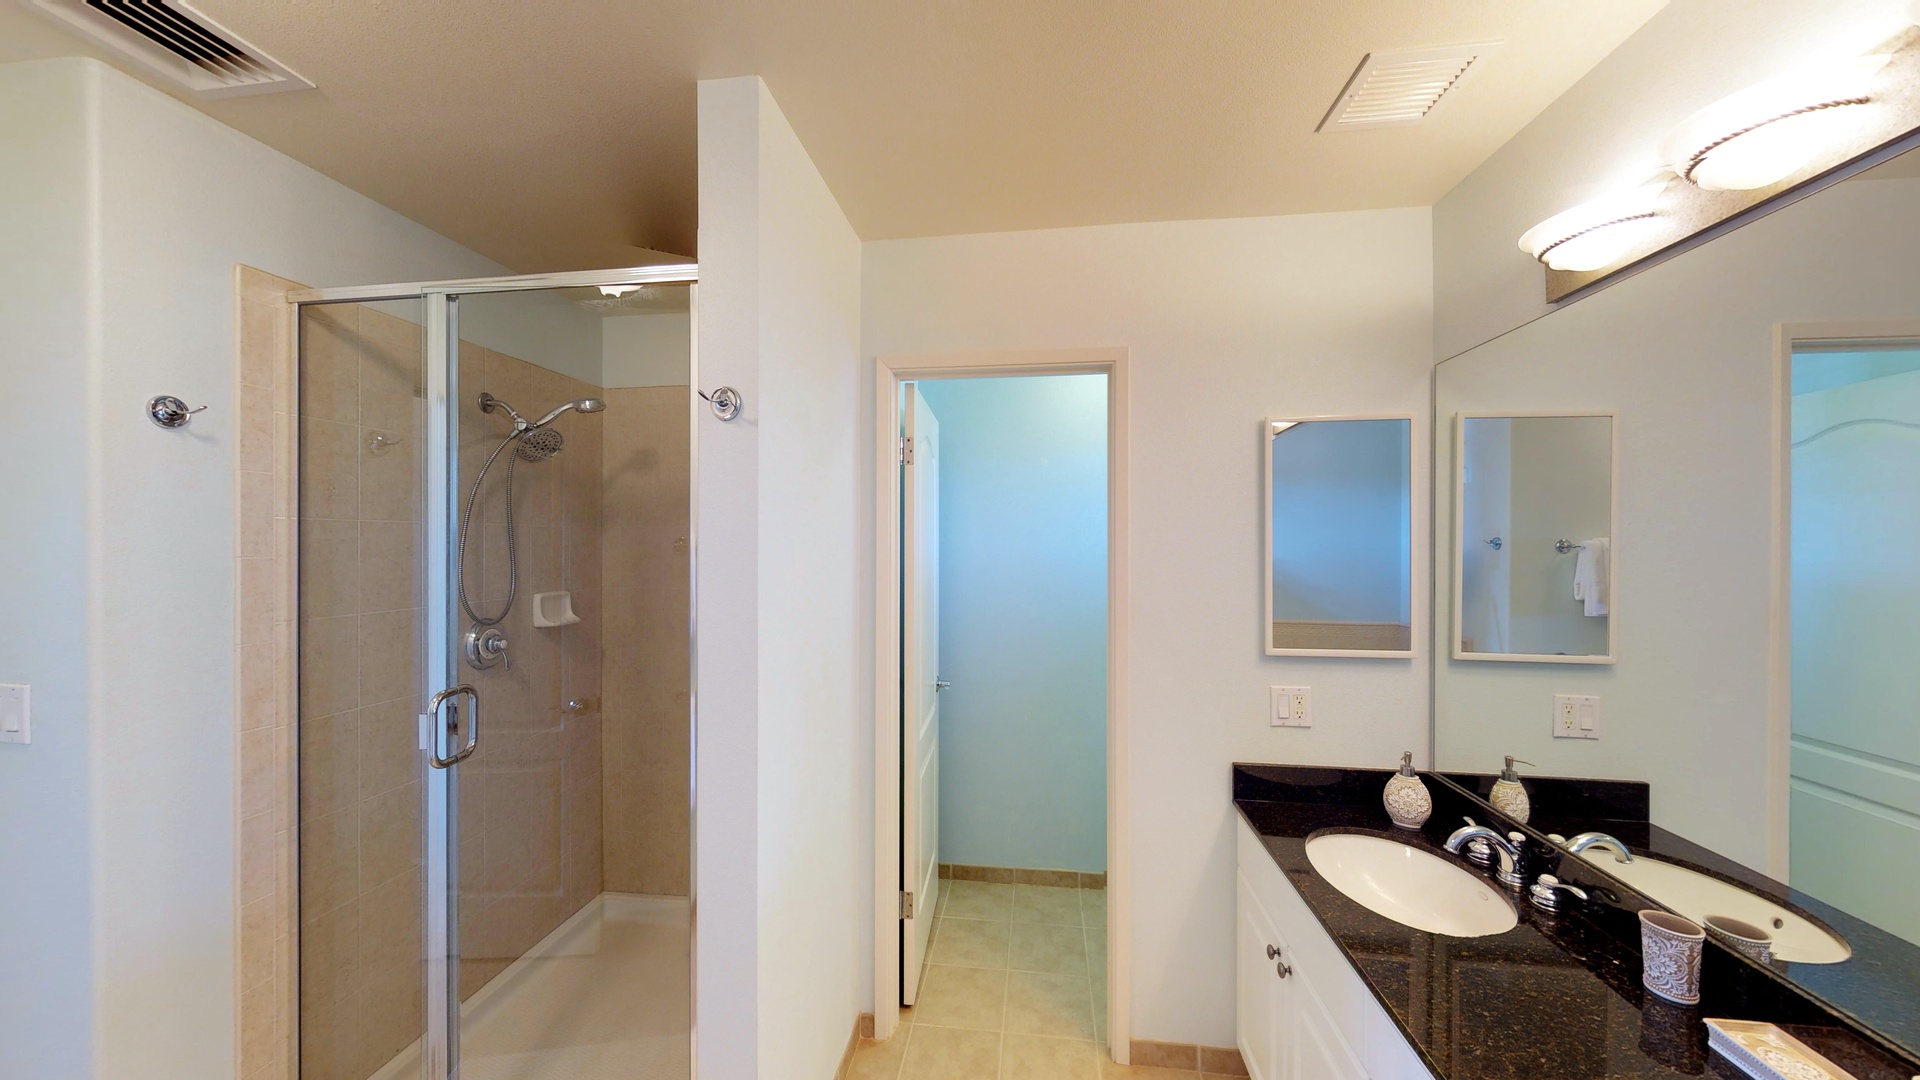 Kapolei Vacation Rentals, Ko Olina Kai 1035D - The large primary guest bathroom with a walk-in shower and double vanity.